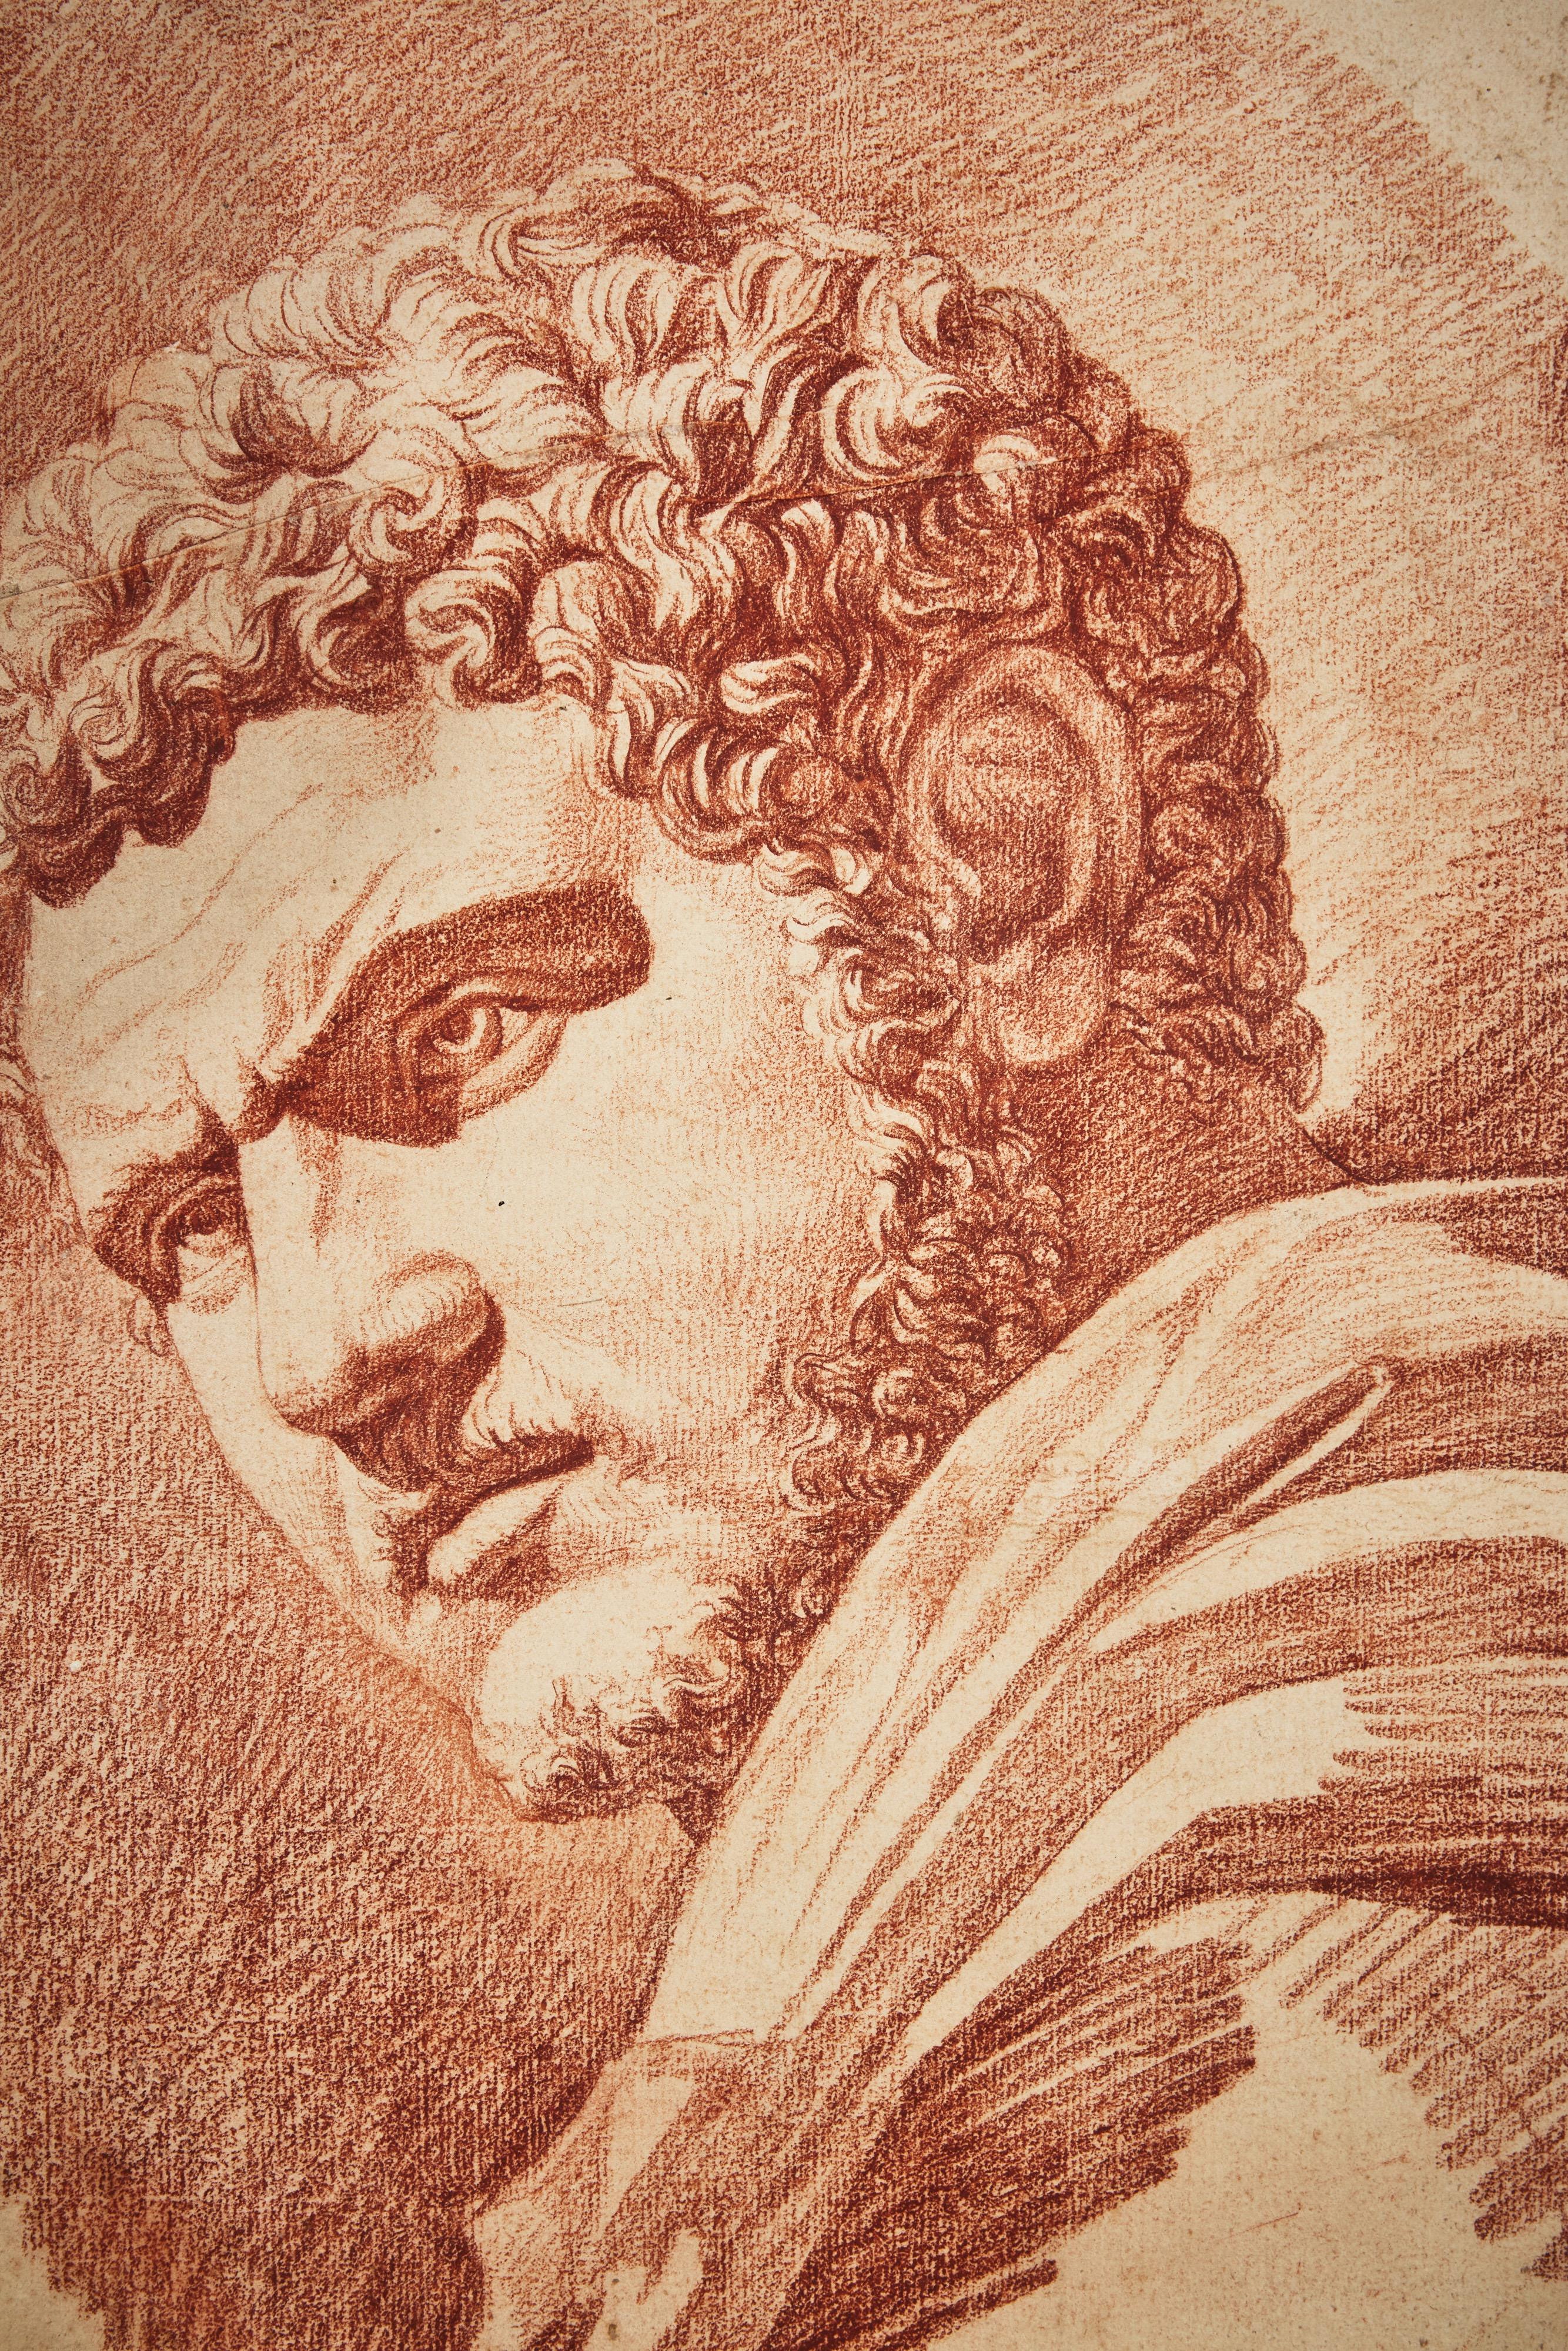  Caracalla, An 18th Century Drawing Attributed Drawing to Johan Tobias Sergel 2